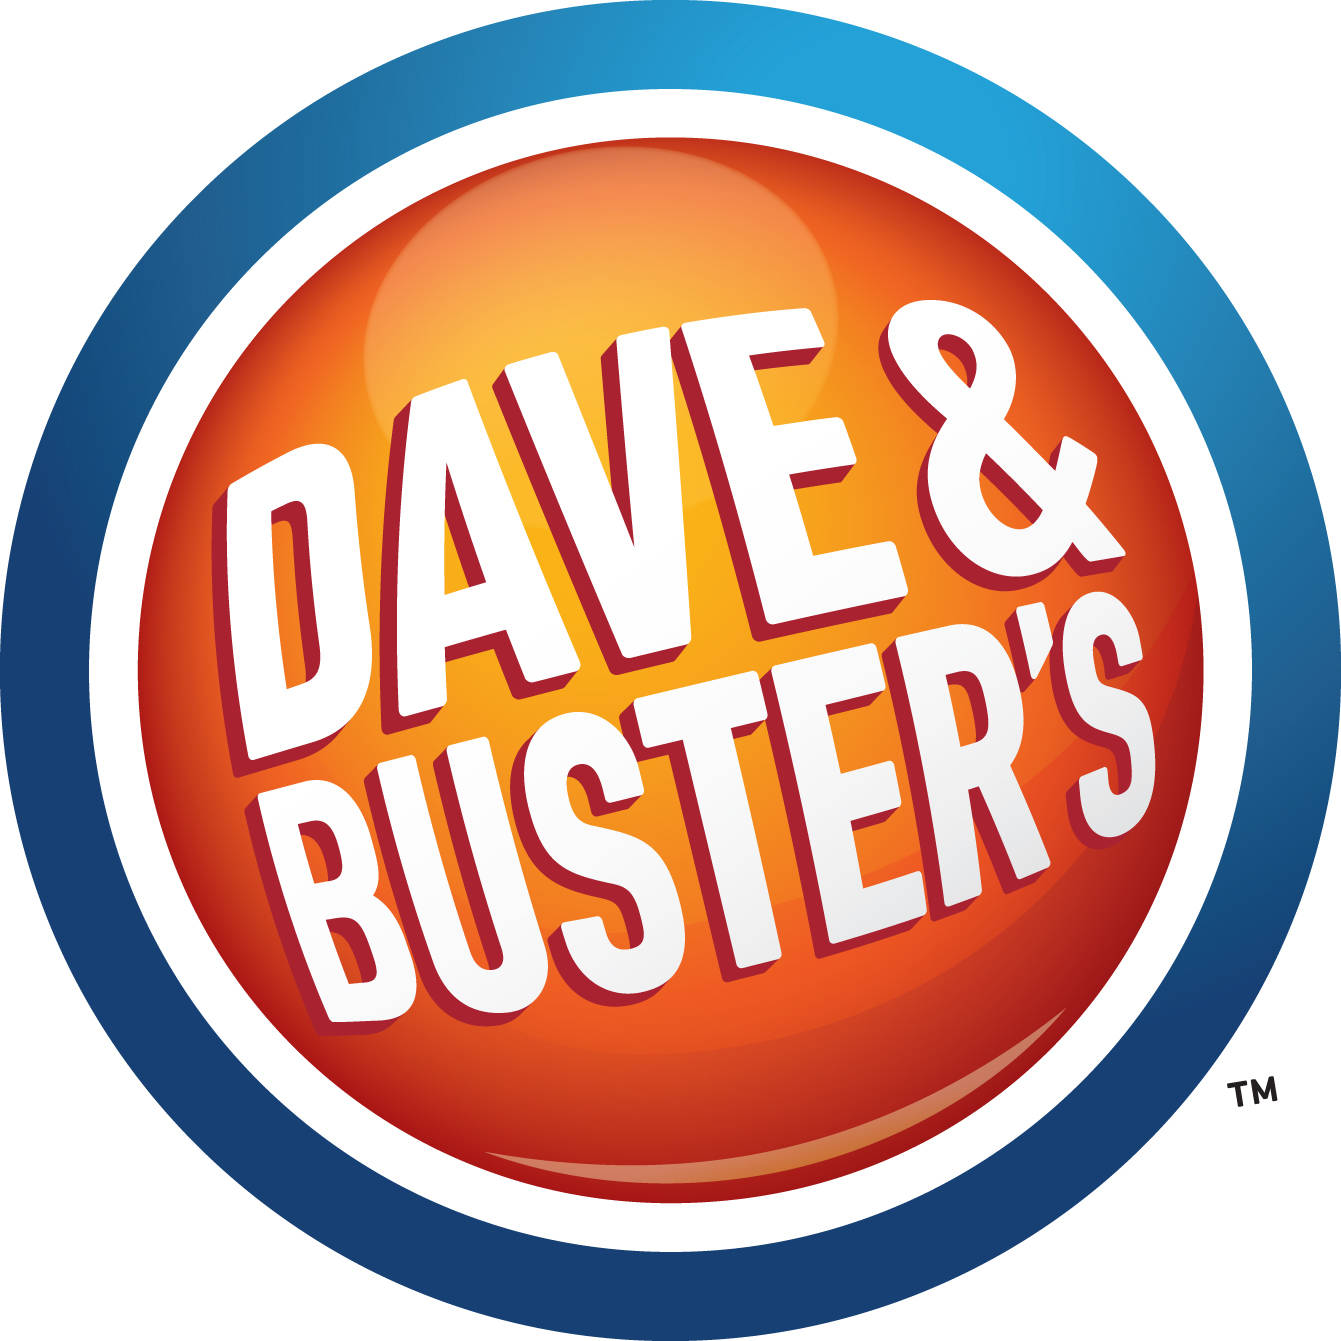 First-in-state Dave & Buster’s to debut at The Outlet Collection Seattle this fall